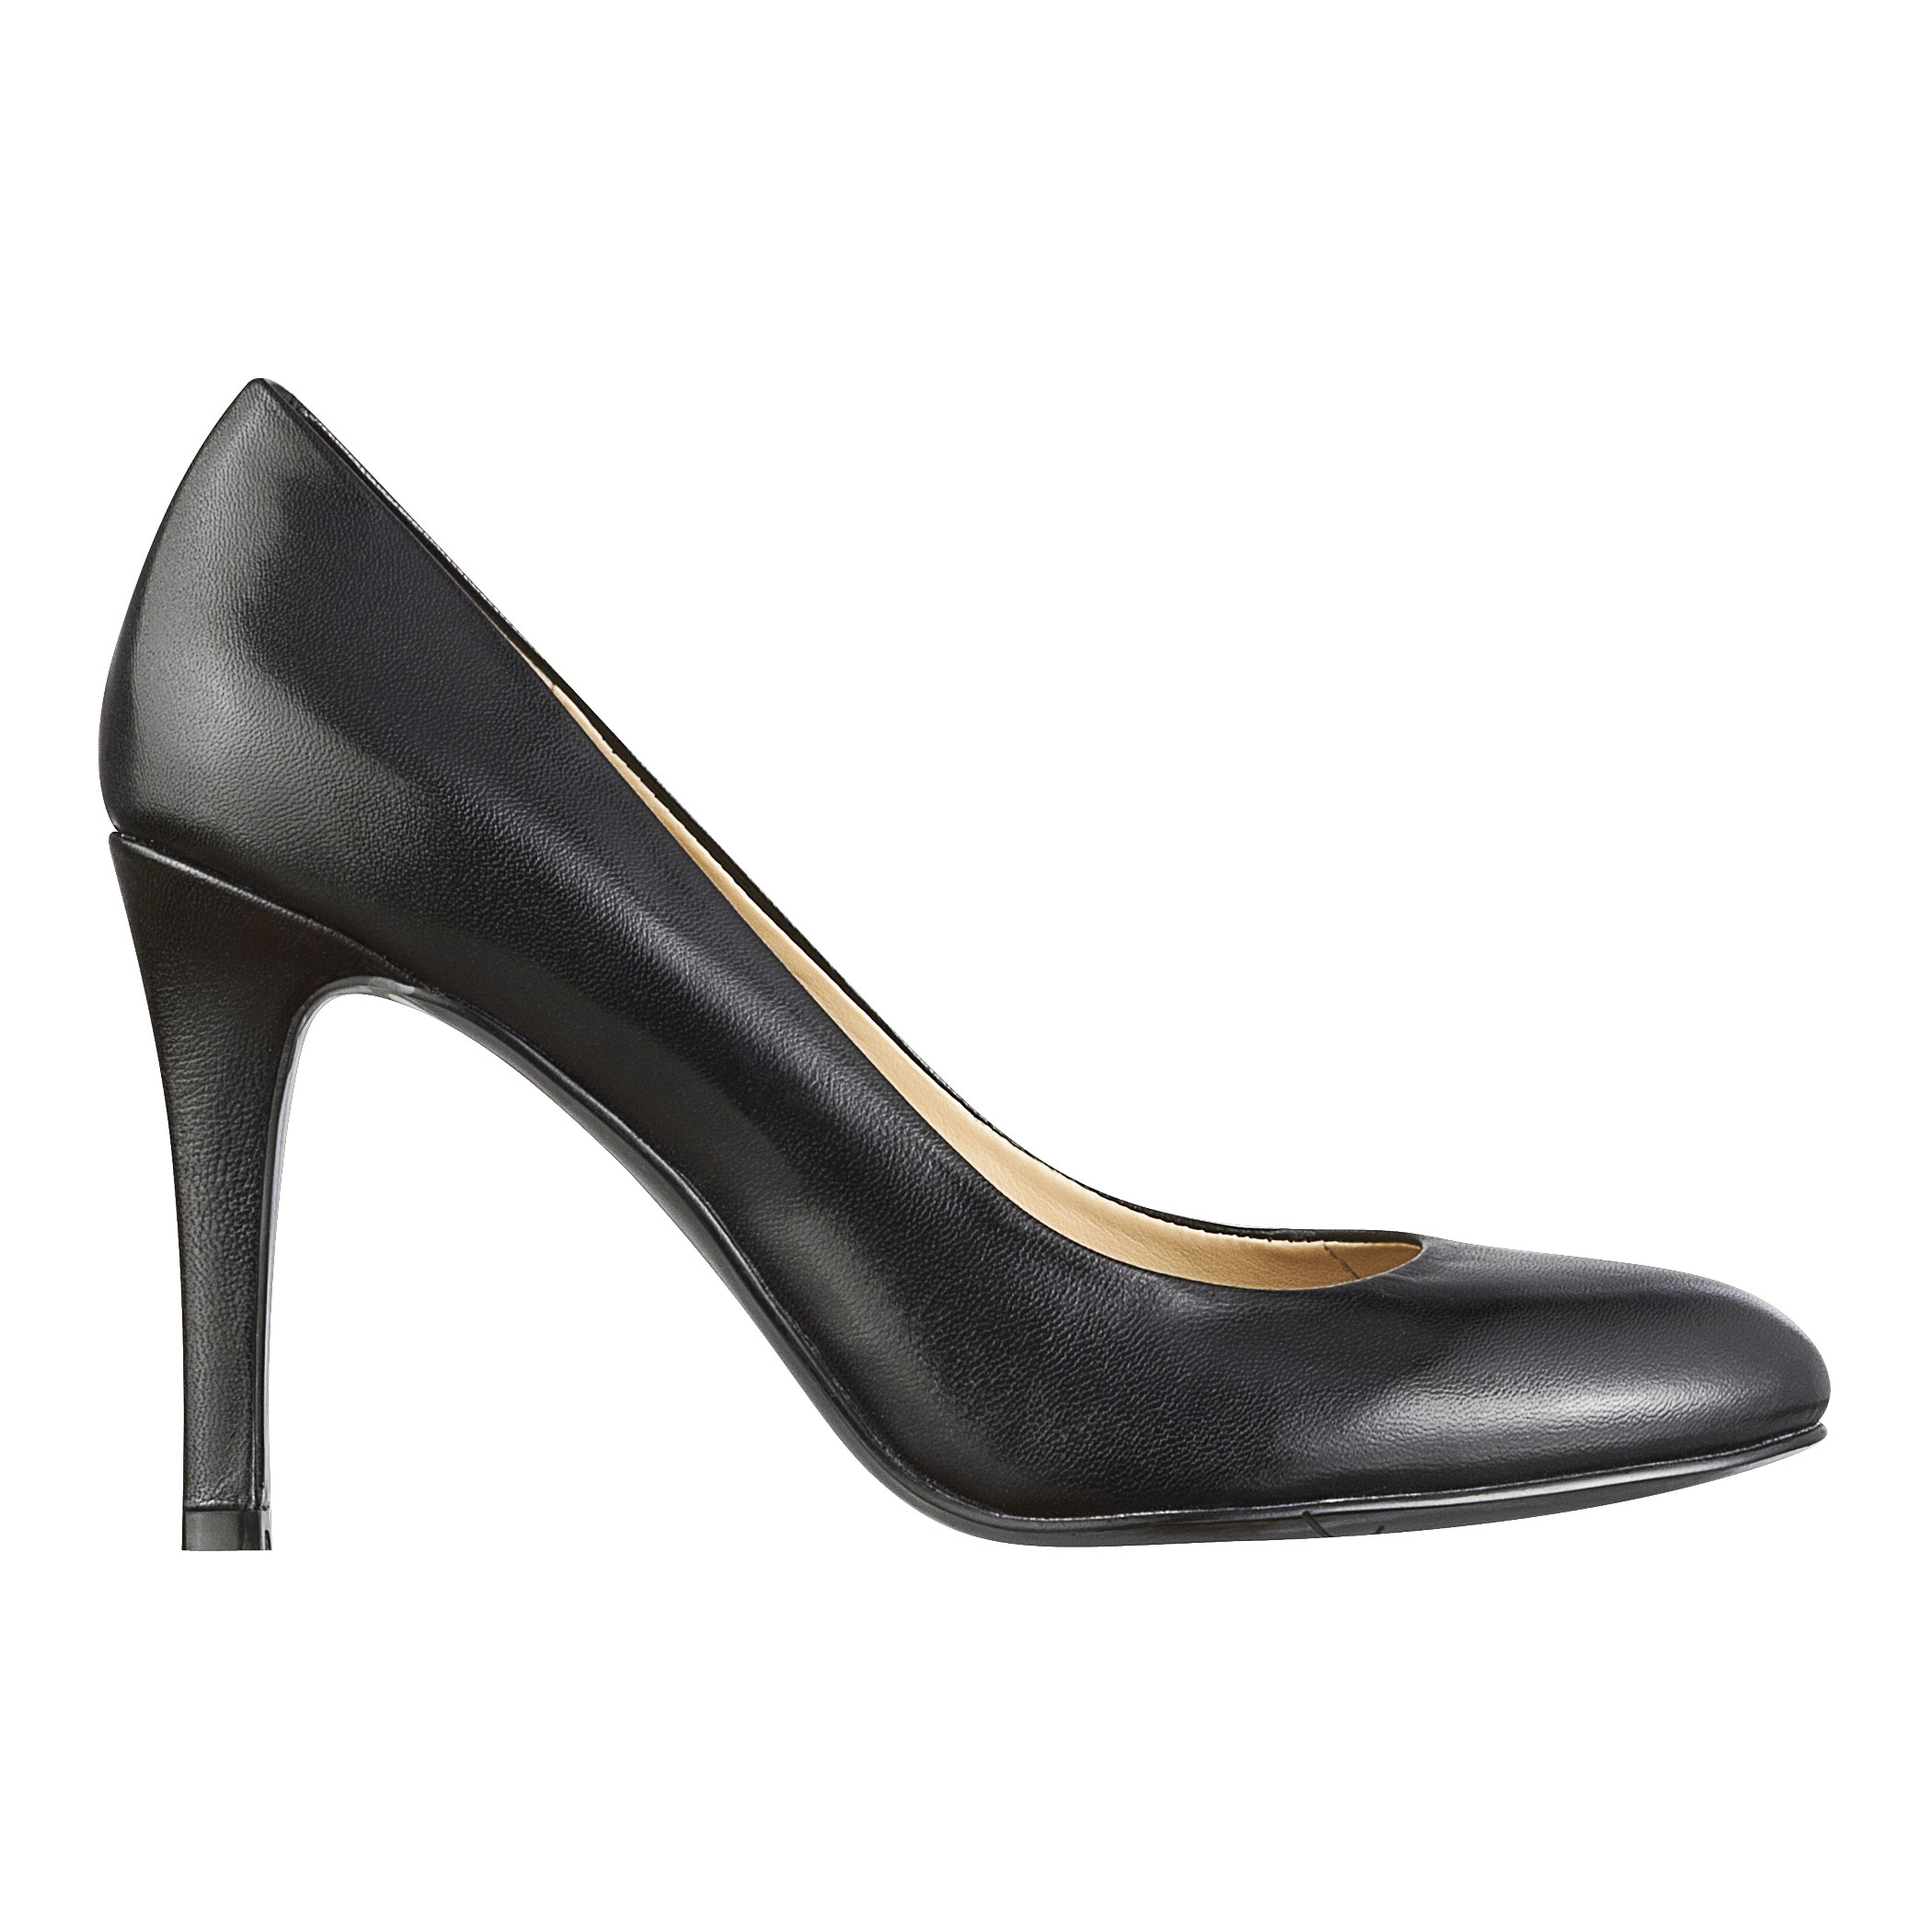 Nine west Martina Pointy Toe Pumps in Black | Lyst